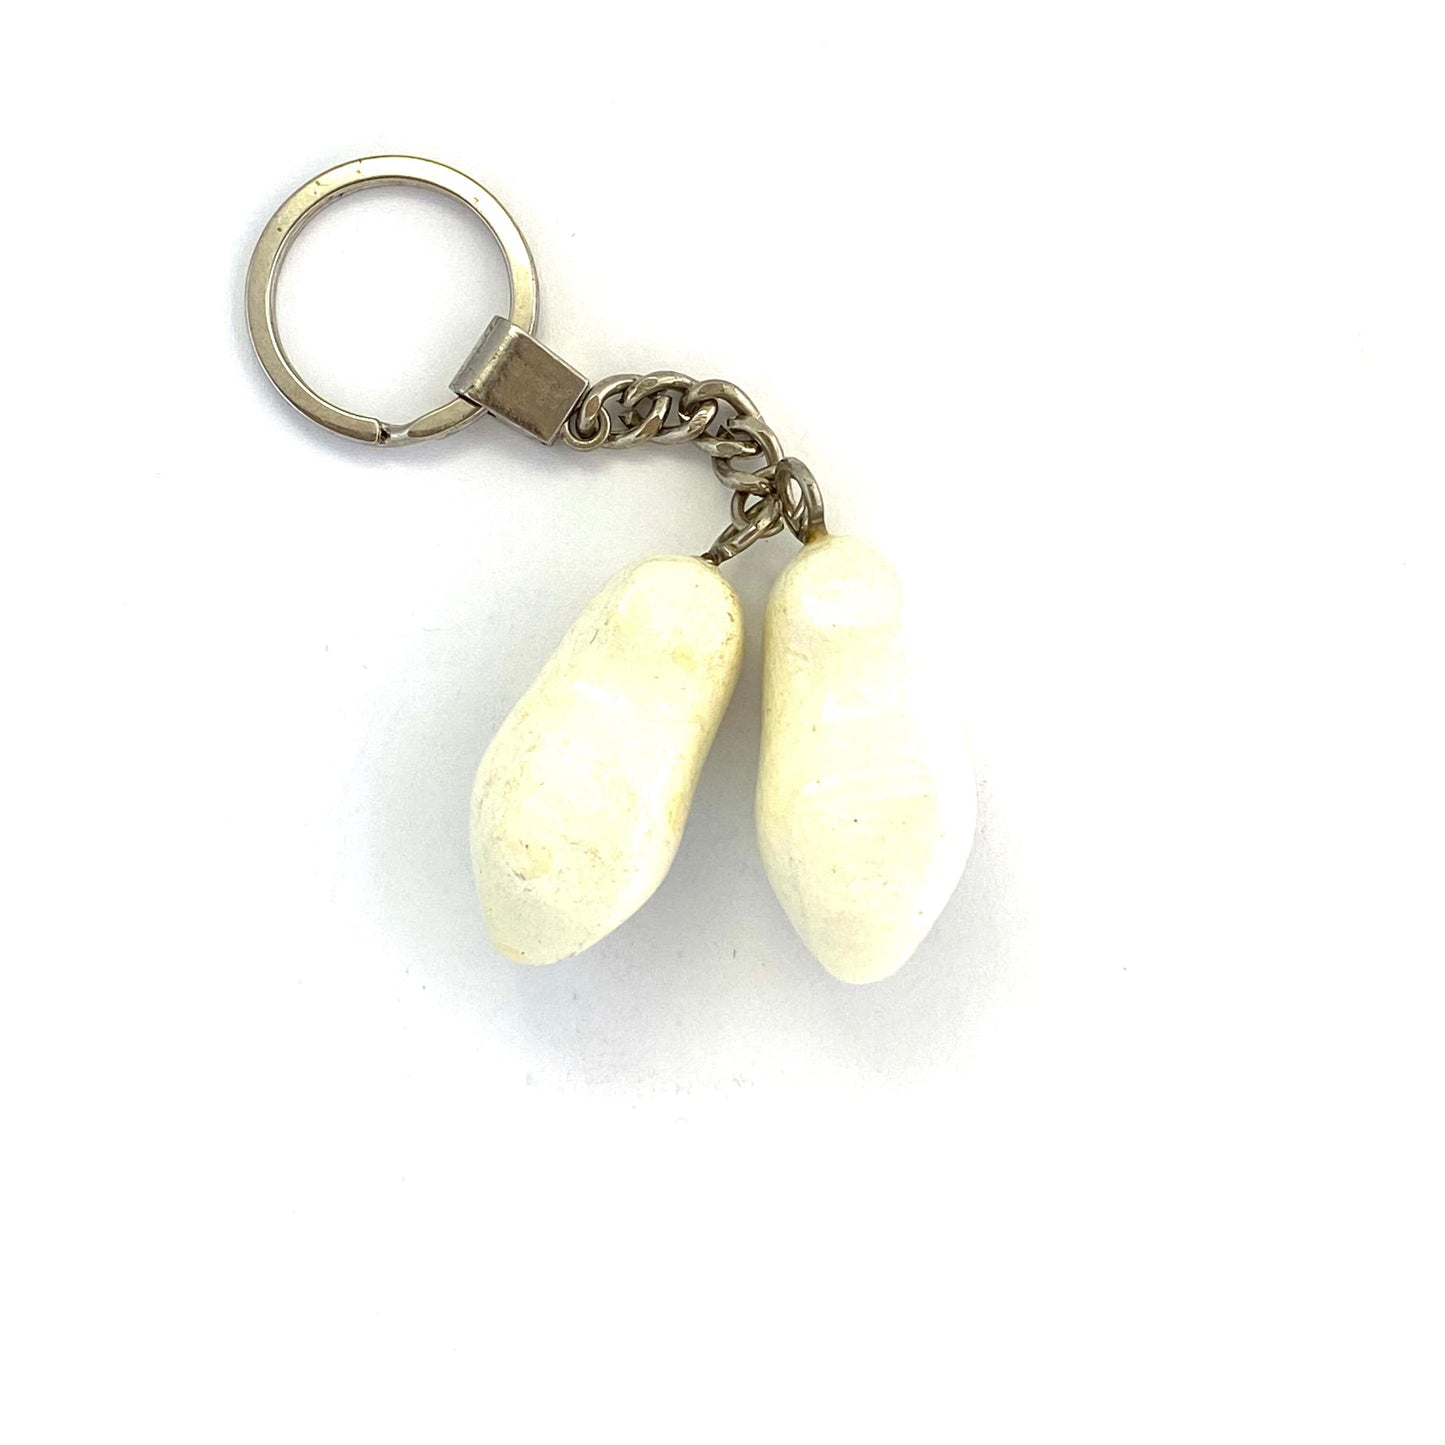 Vintage "TNO" Clog Shoes Keychain Novelty Collectible